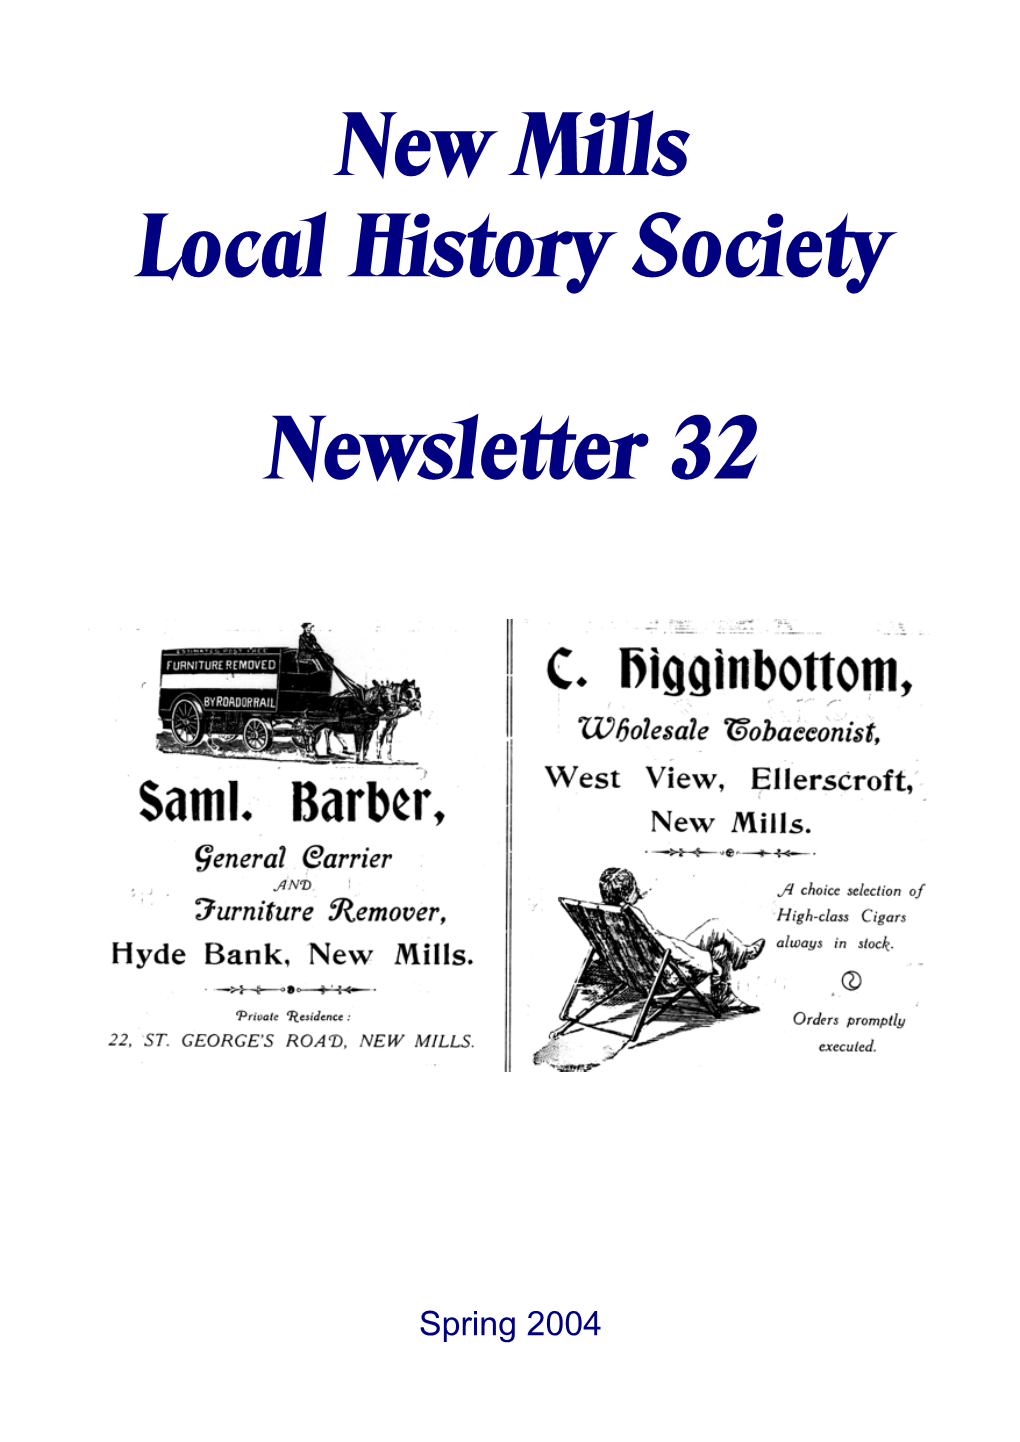 New Mills Local History Society Newsletter 32